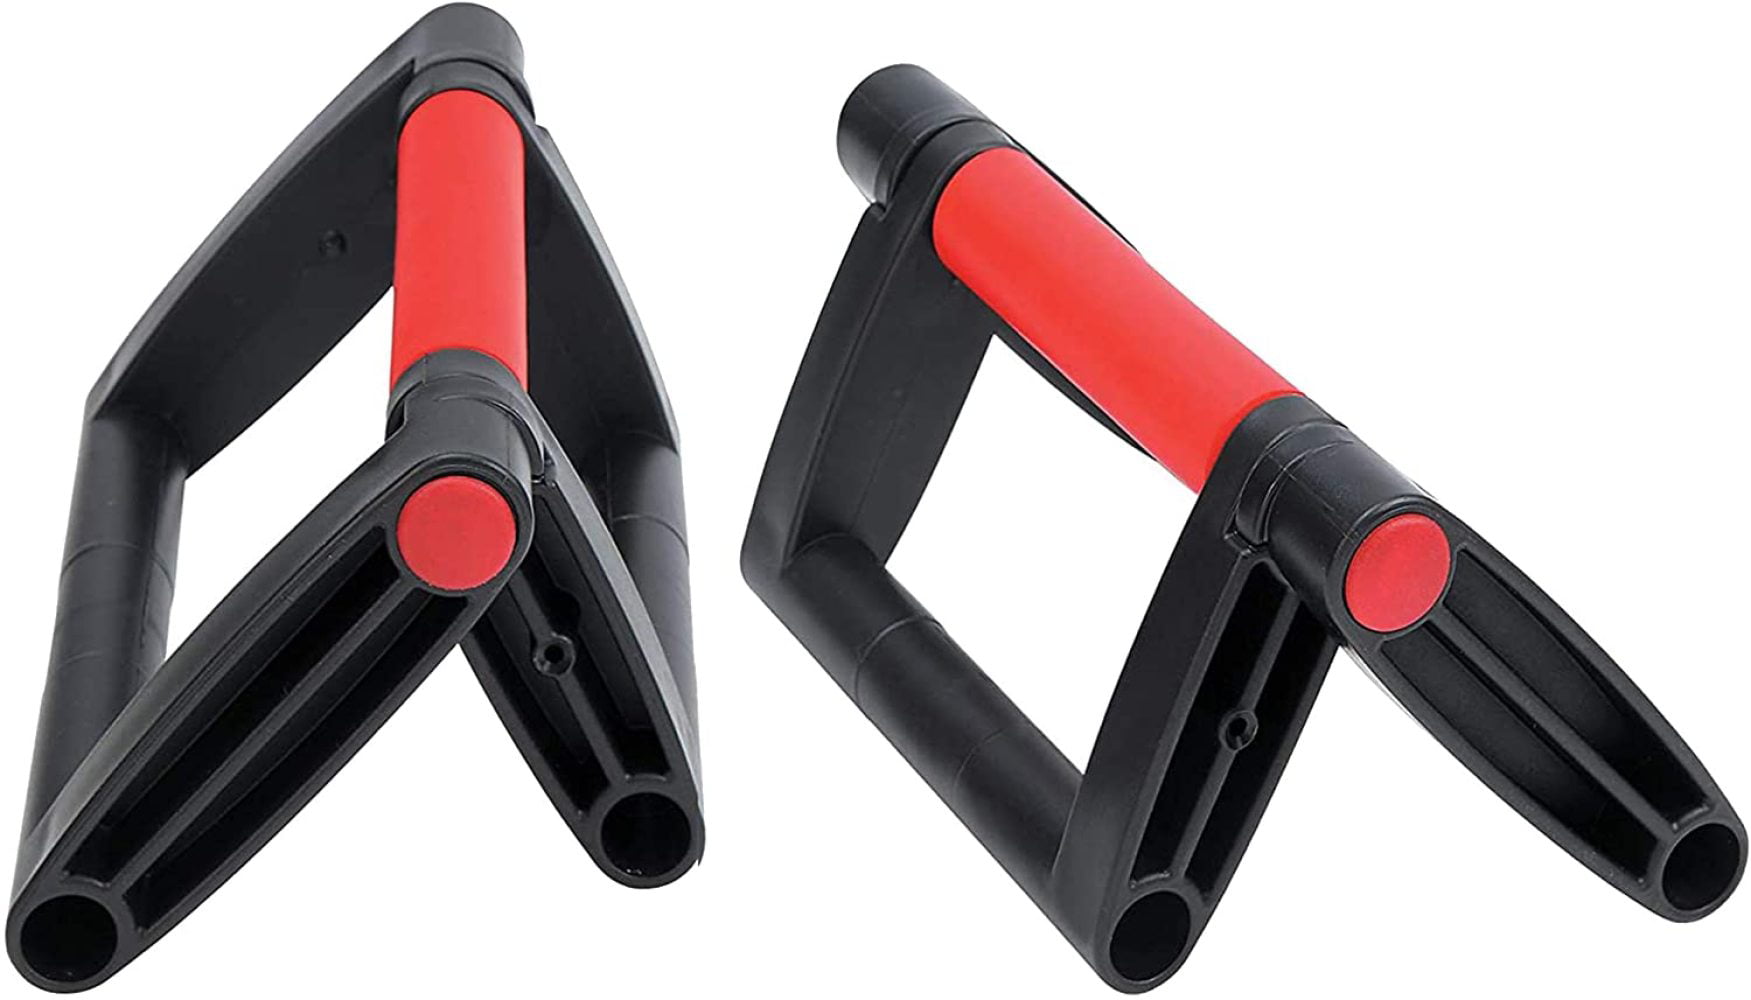 Collapsible Pushup Stand HemingWeigh Push up Bar 